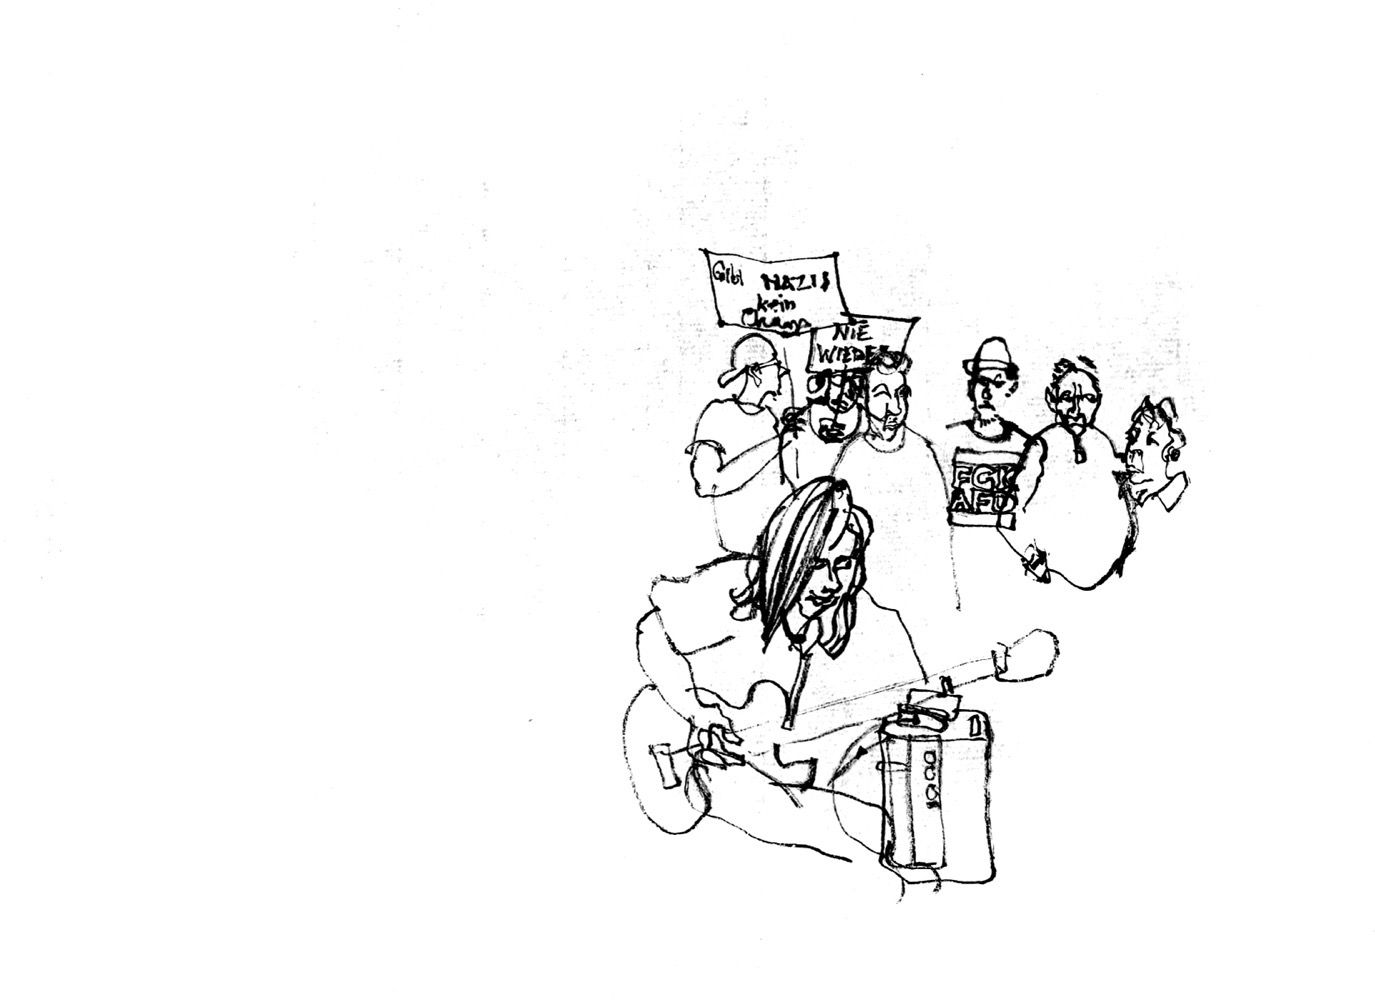 Ink drawing of a guitar player, some protesters adainst far right behind him.